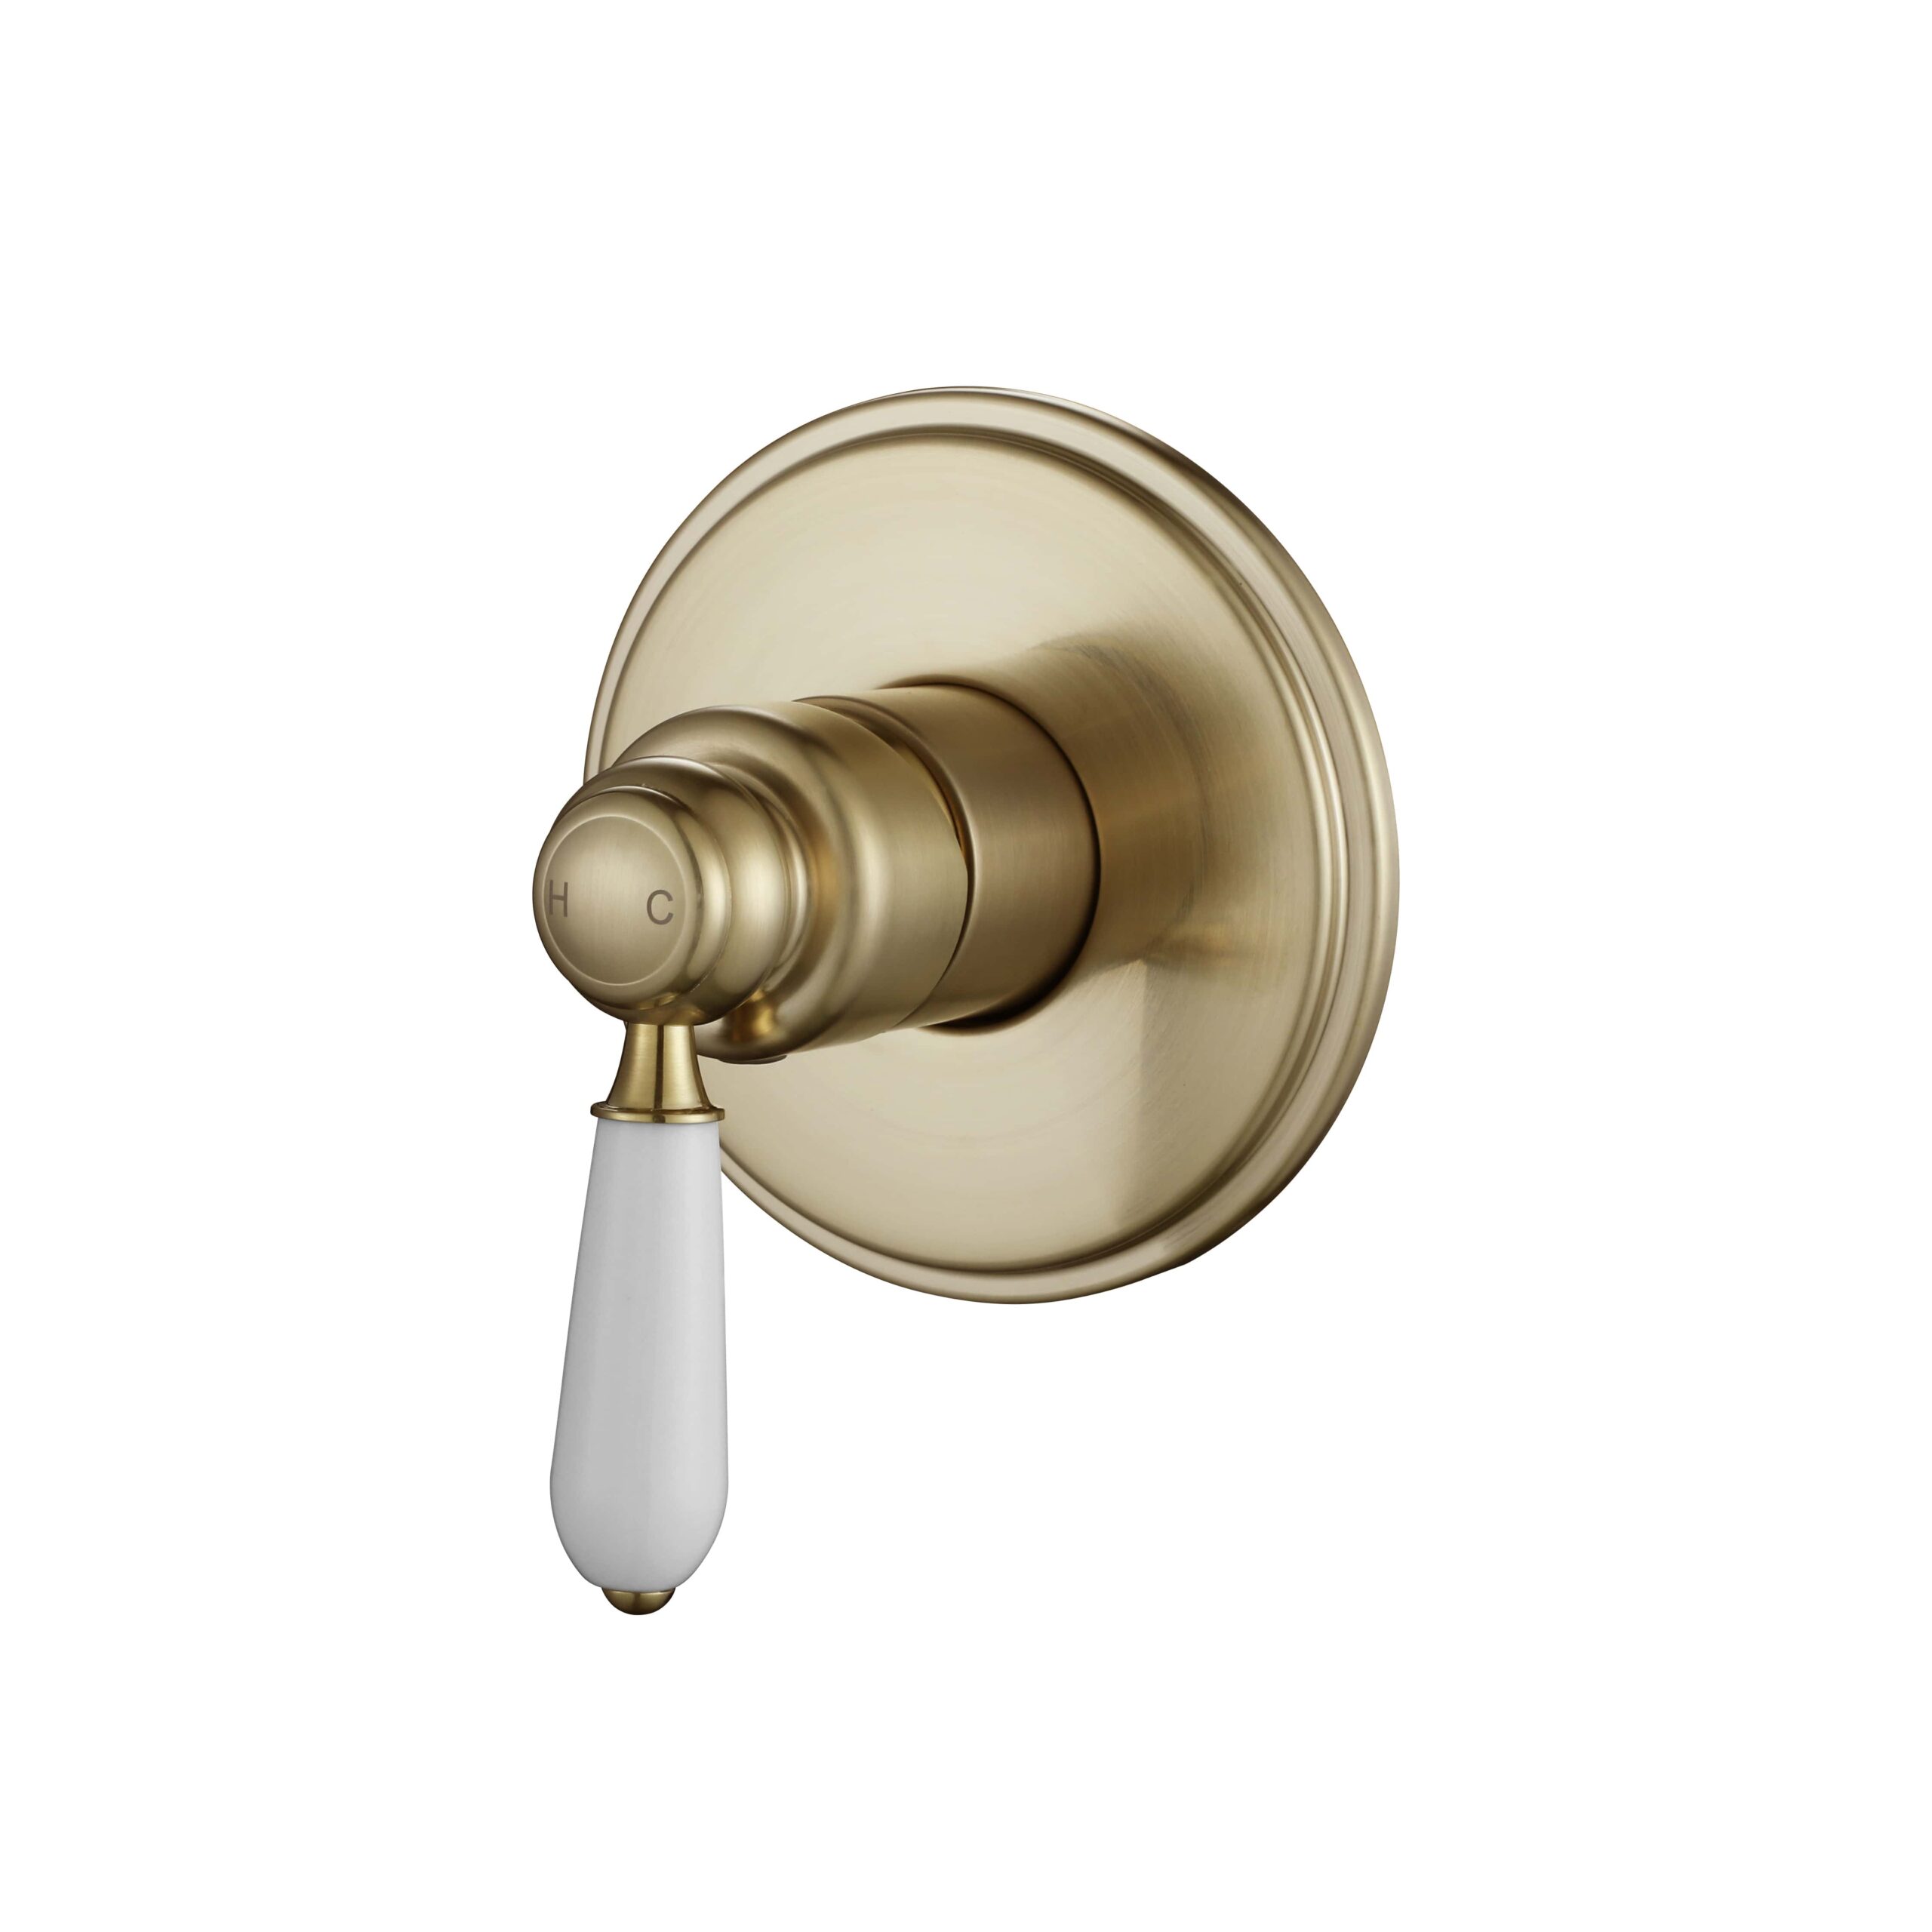 Bordeaux Brushed Brass Wall Mixer